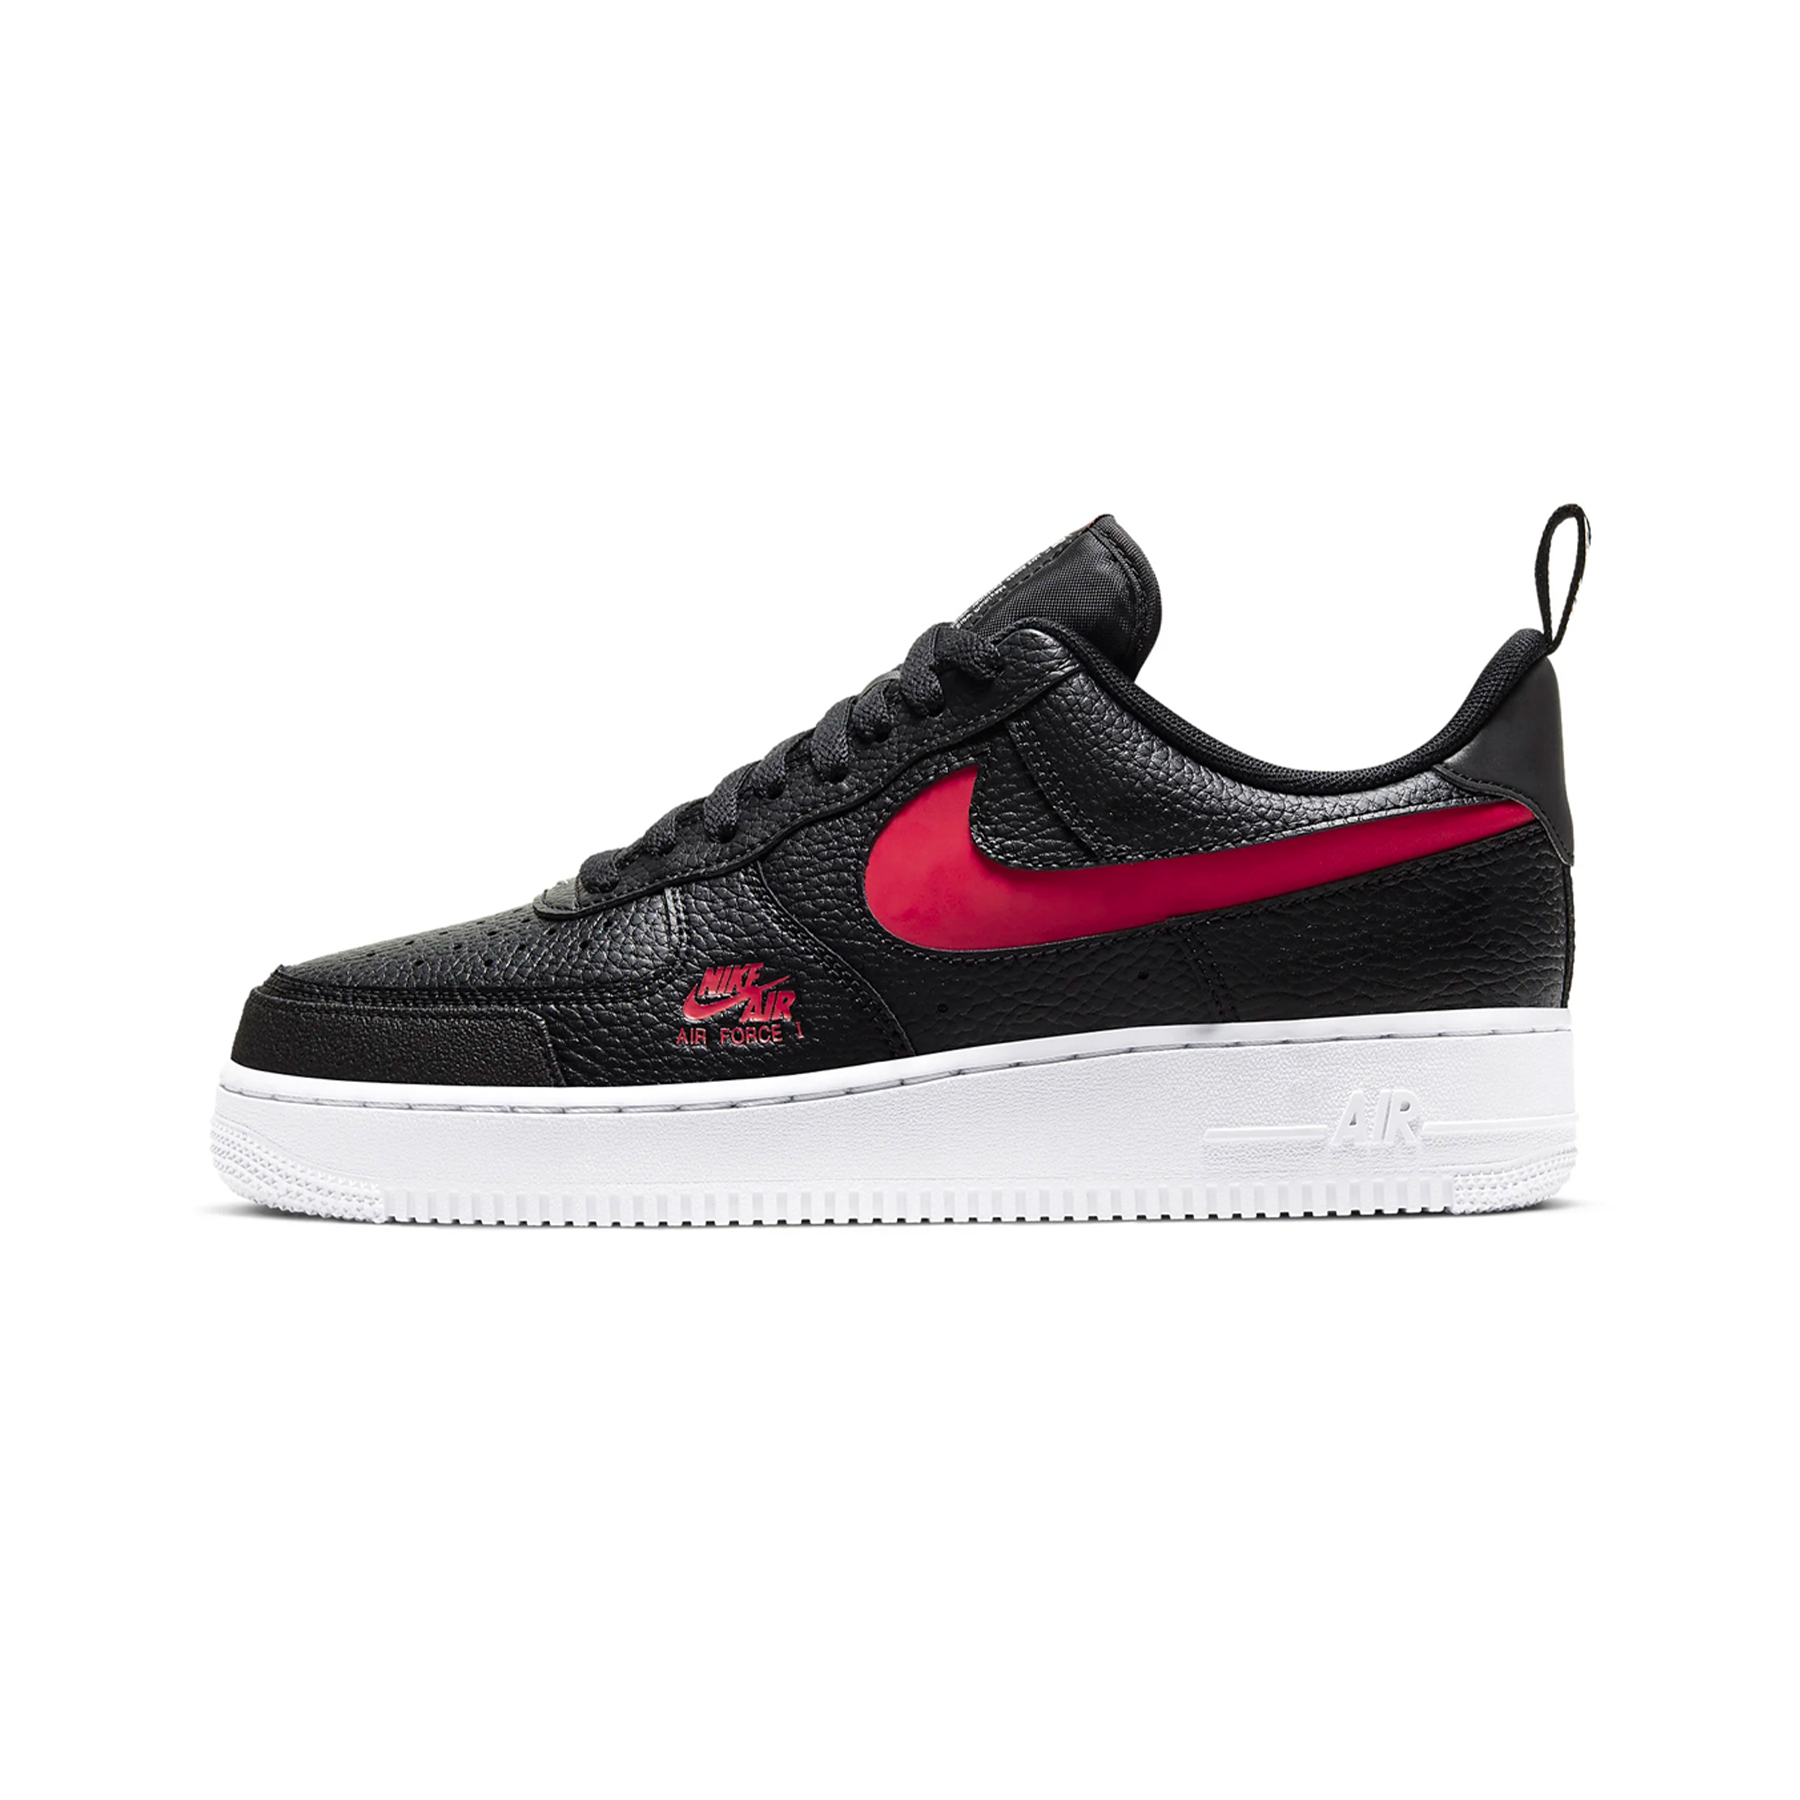 Nike Air Force 1 LV8 Utility Black/Red, Drops